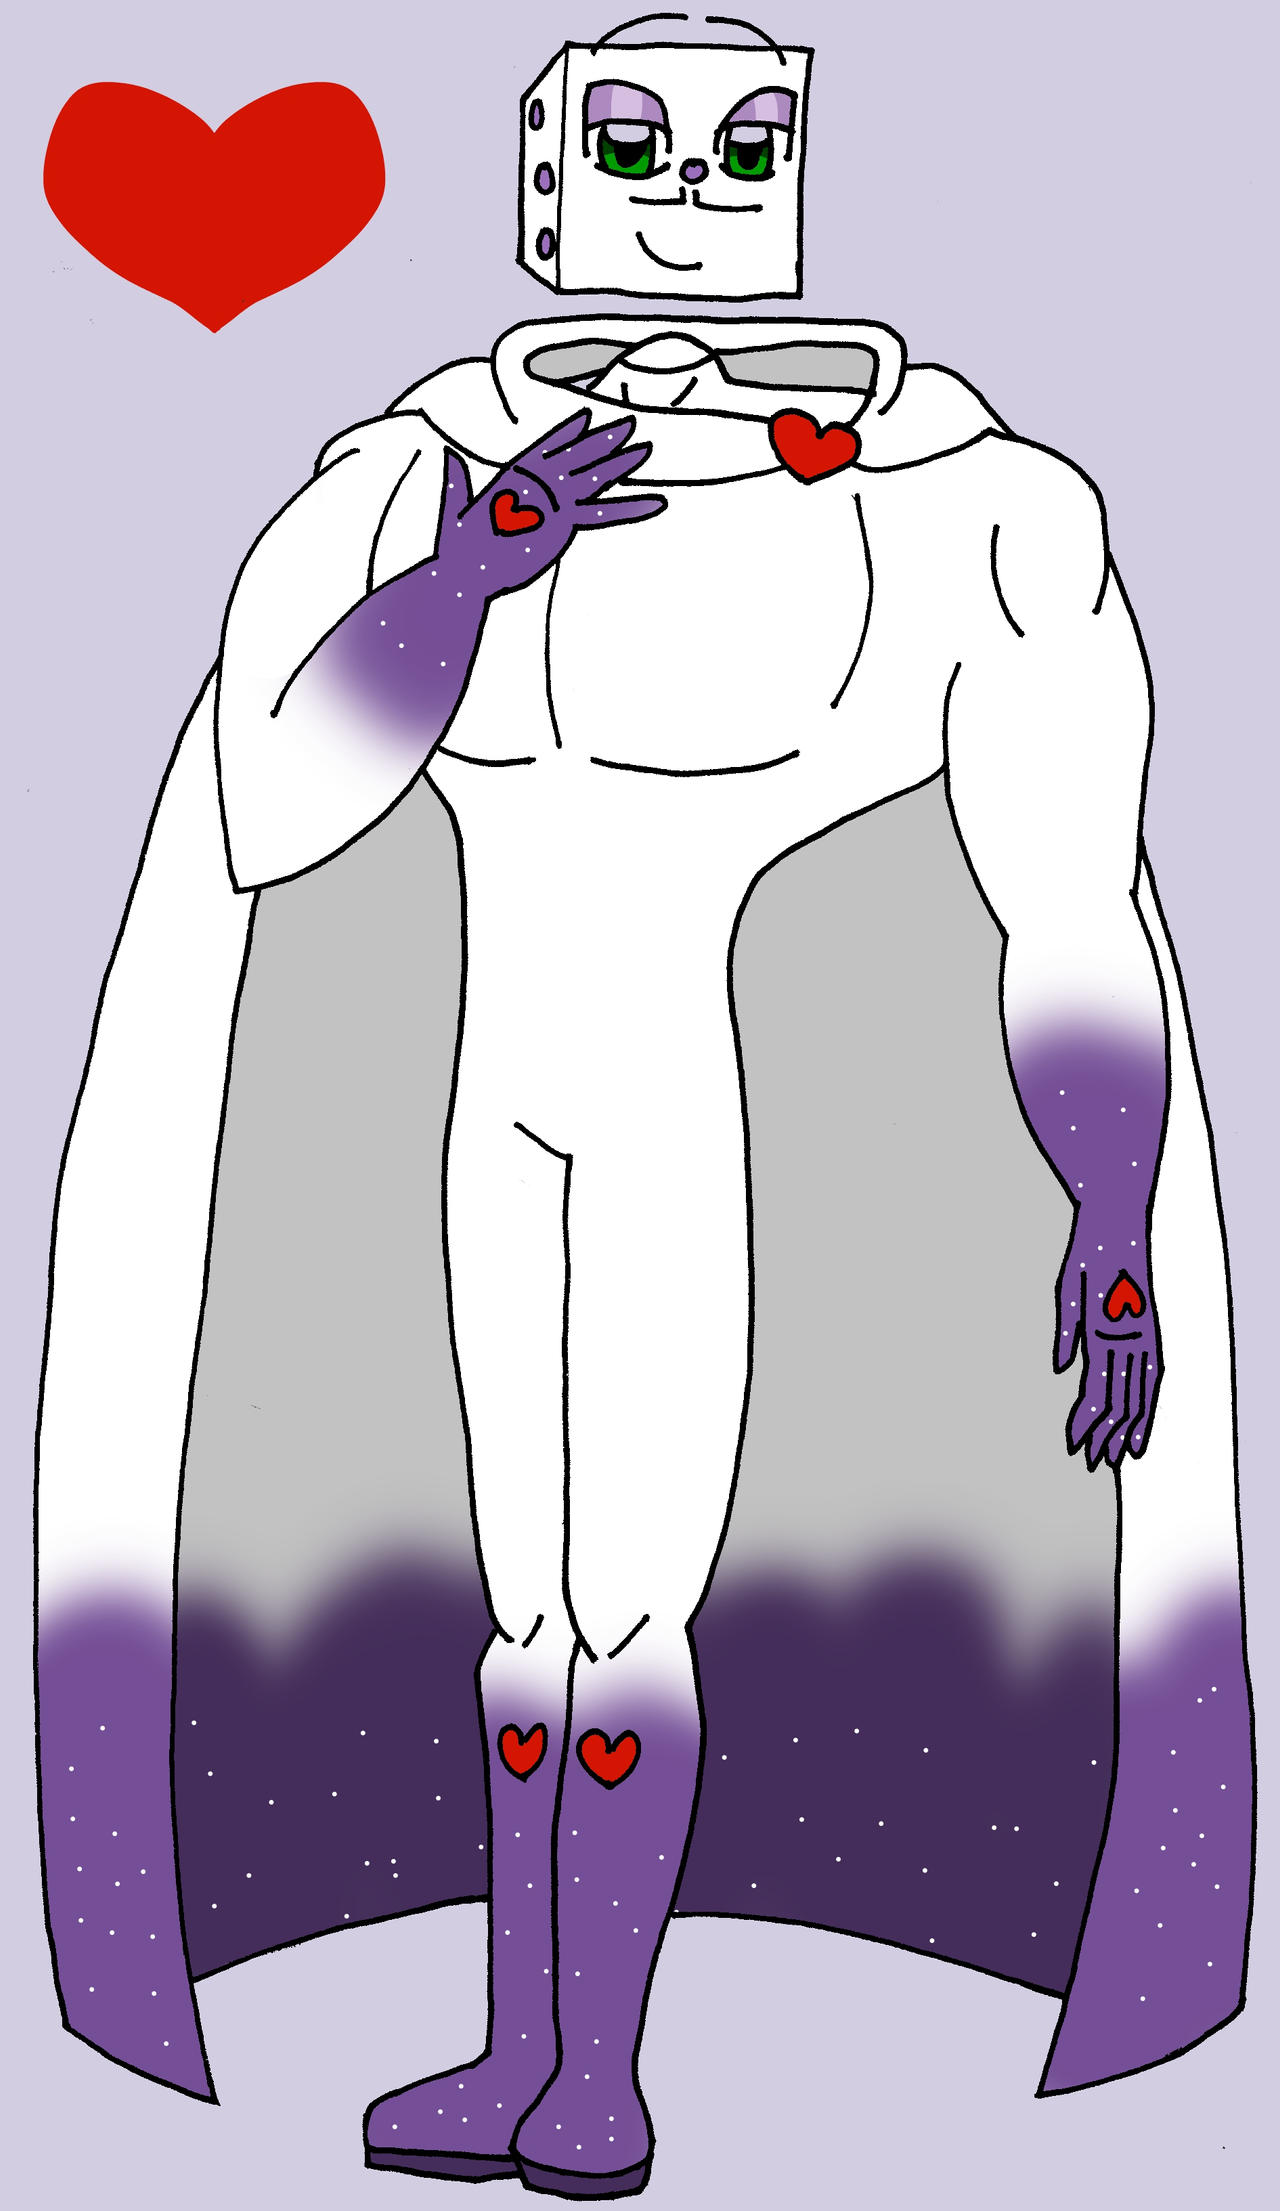 King Dice by Dia1313 on DeviantArt